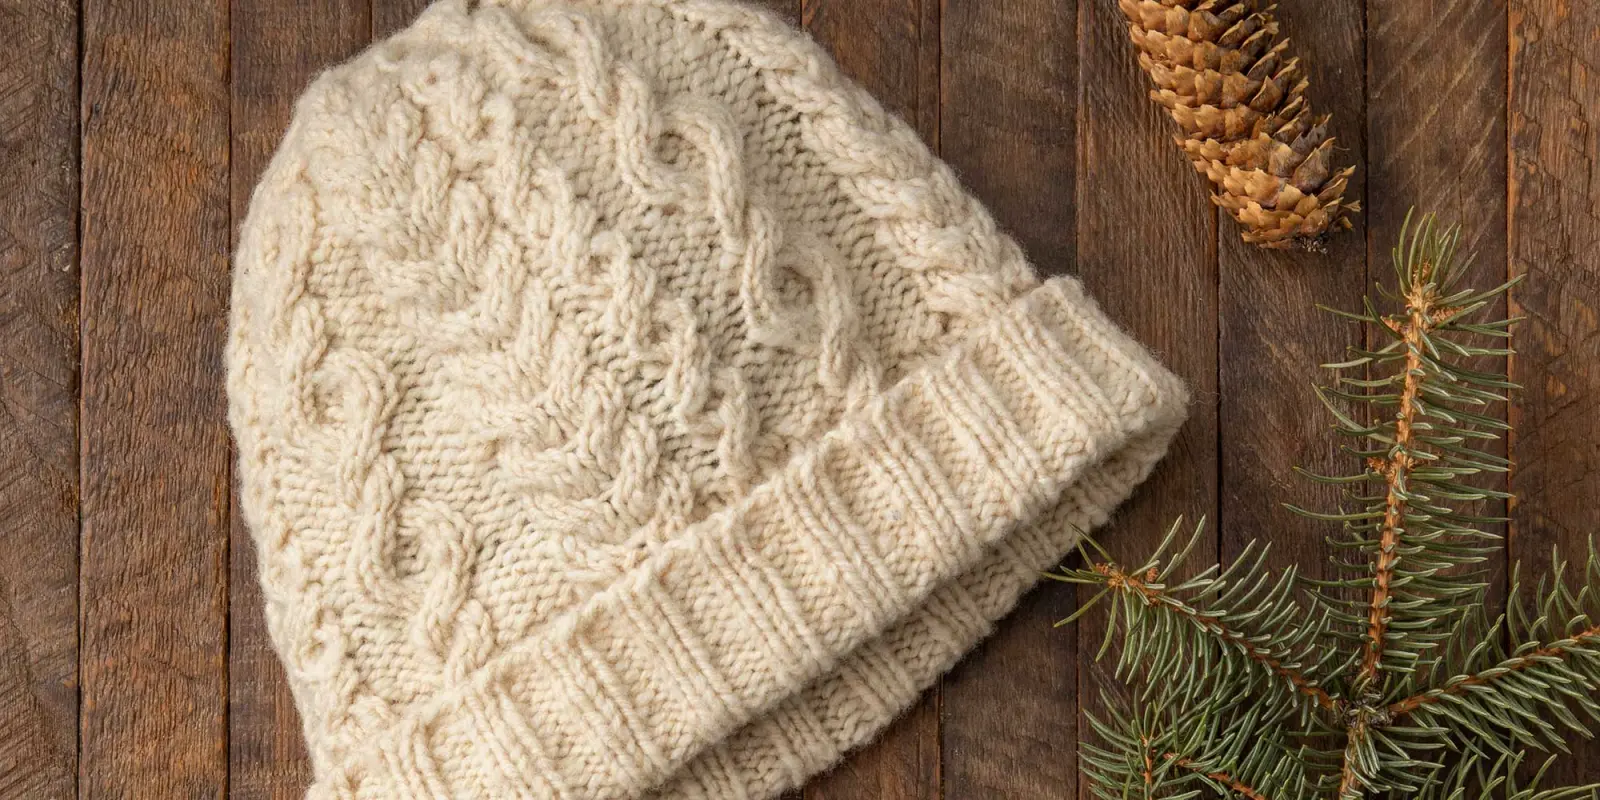 A cream-colored, handknit cabled hat rests on a wood surface next to an evergreen bough and pine cone.